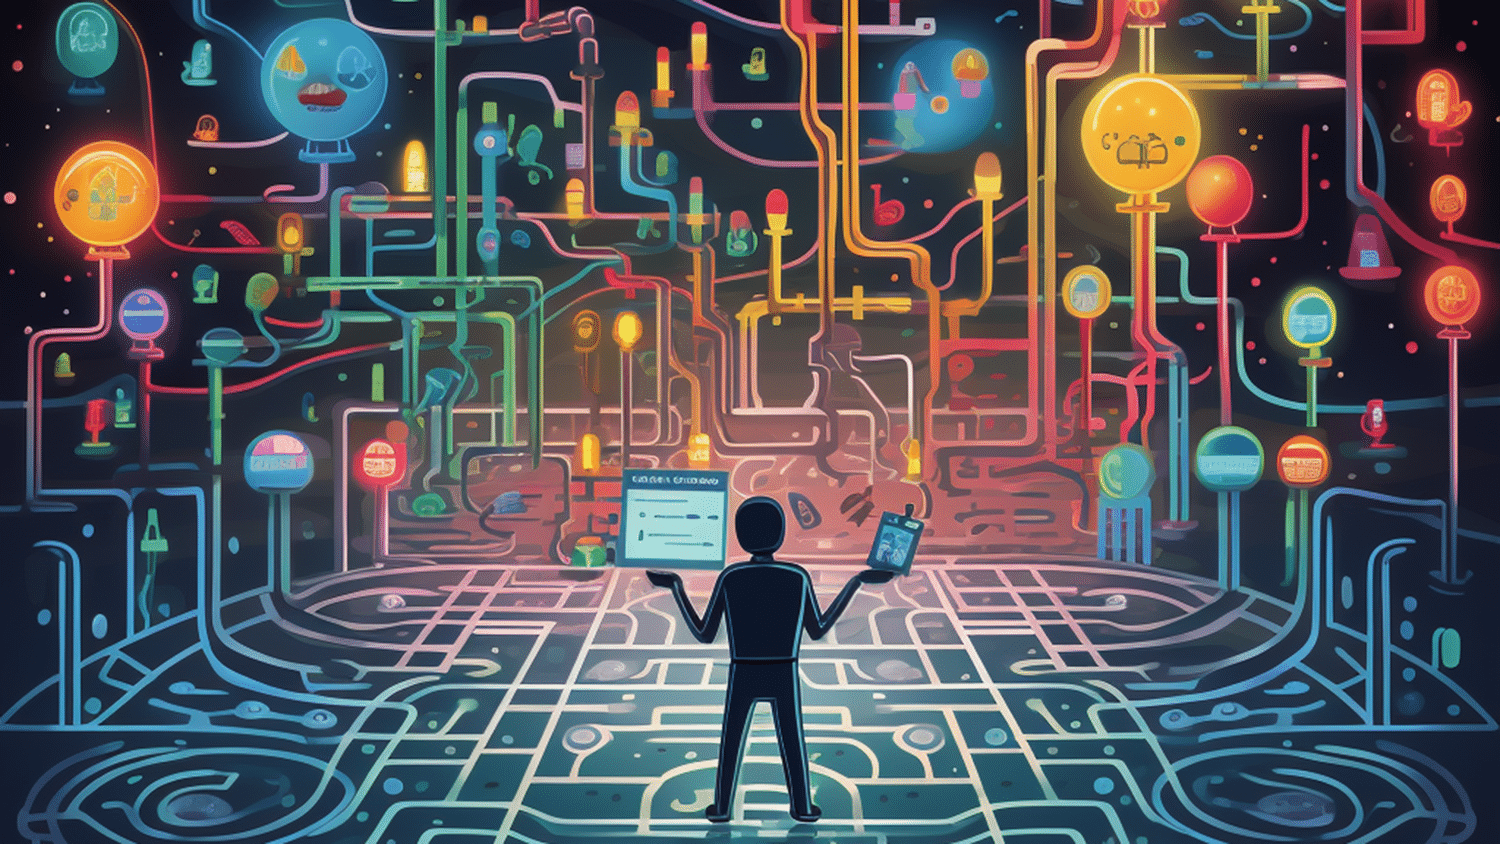 cartoonish image shows a person holding a computer and looking up at a maze of paths that all lead to different glowing lights